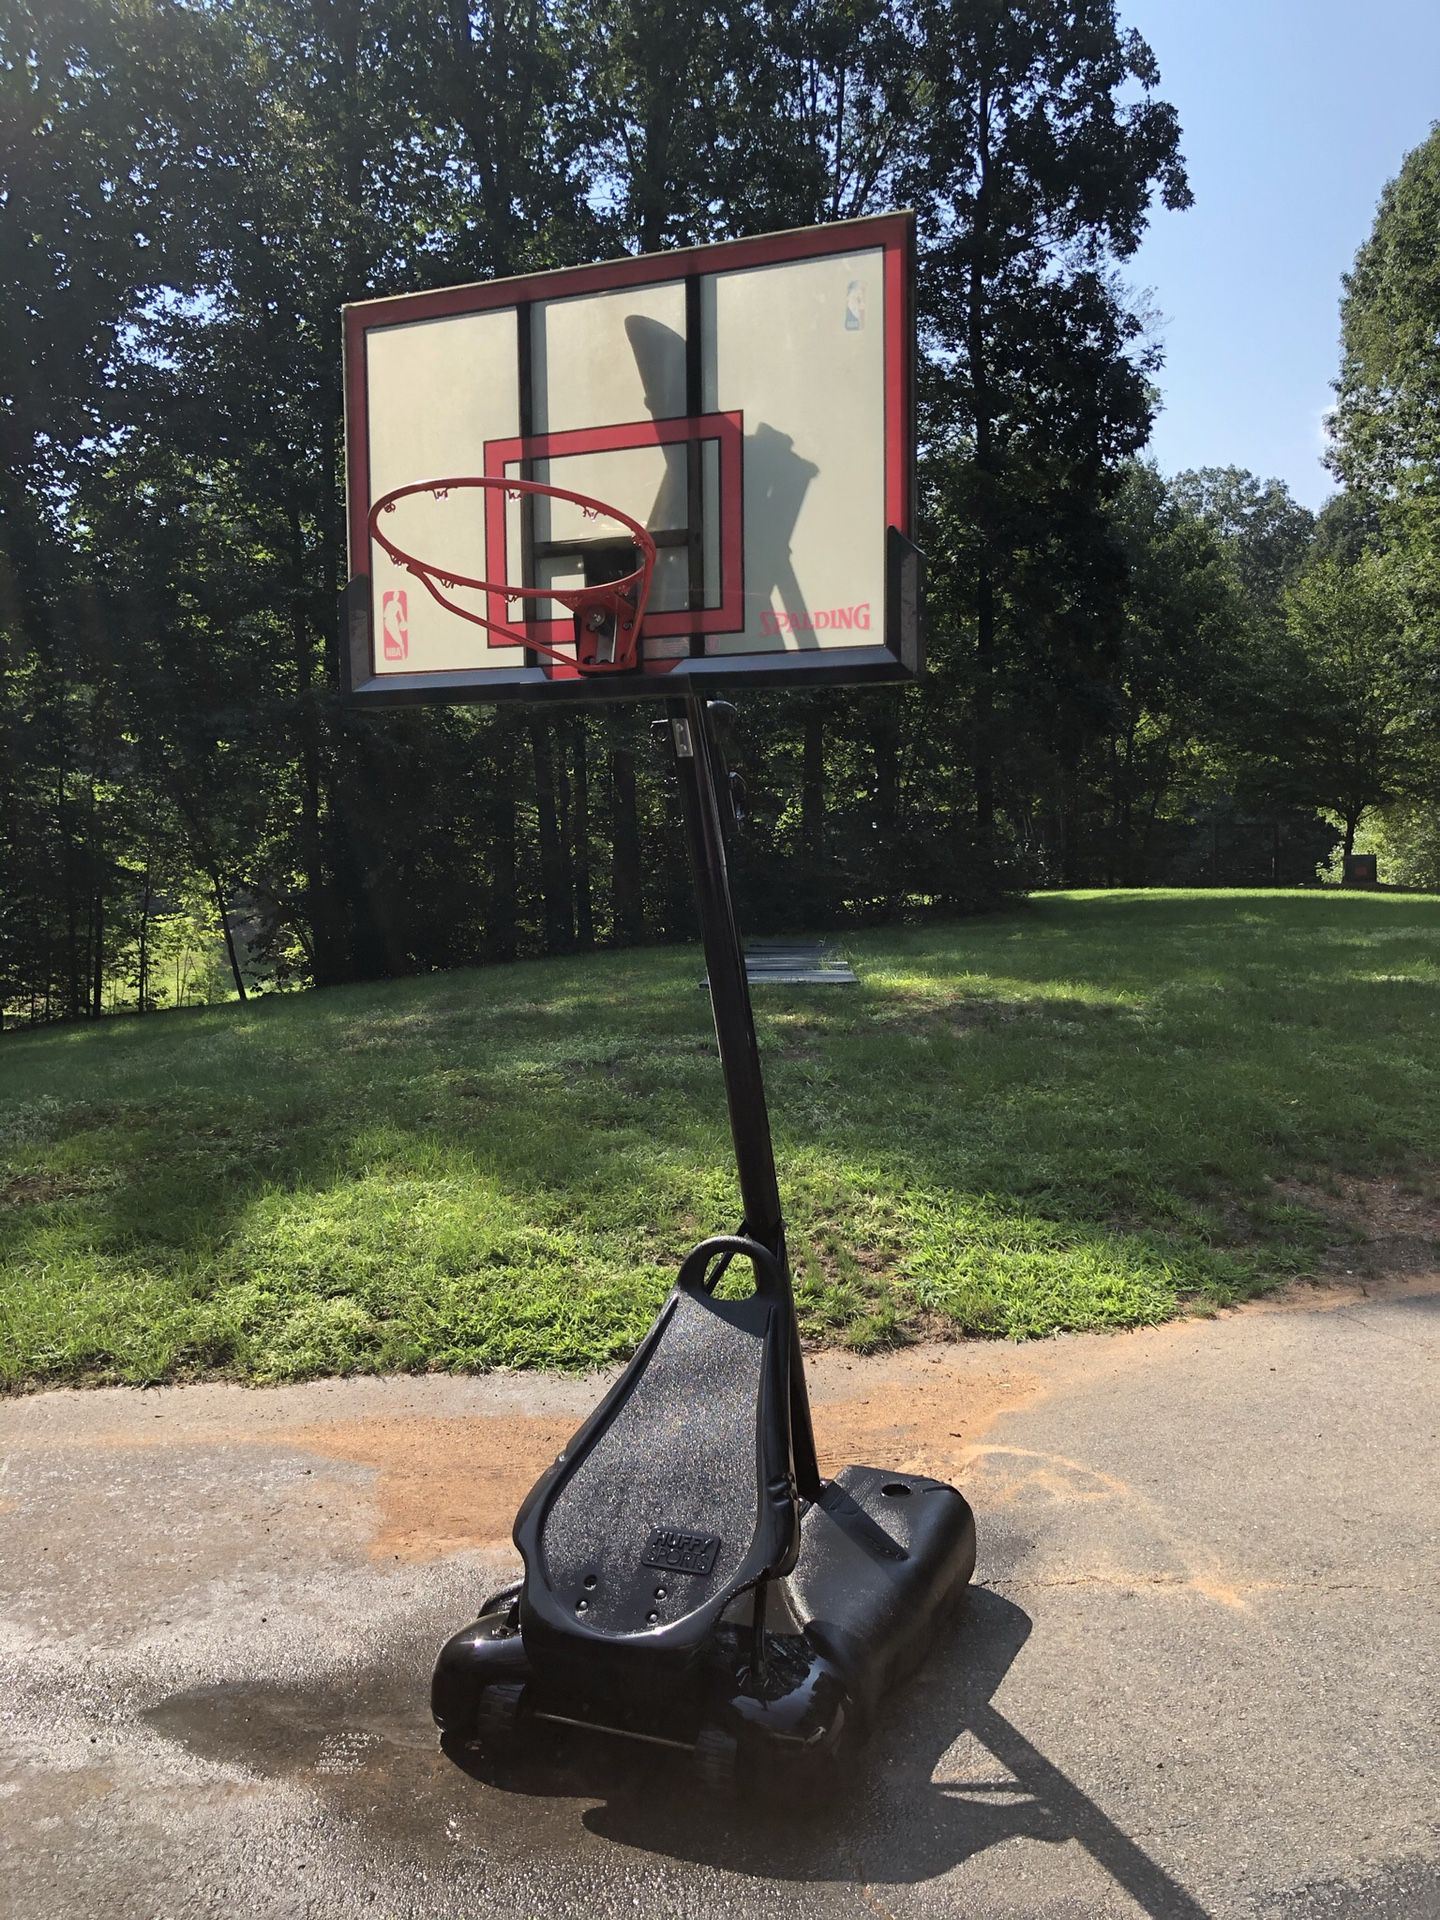 Spalding basketball hoop and stand